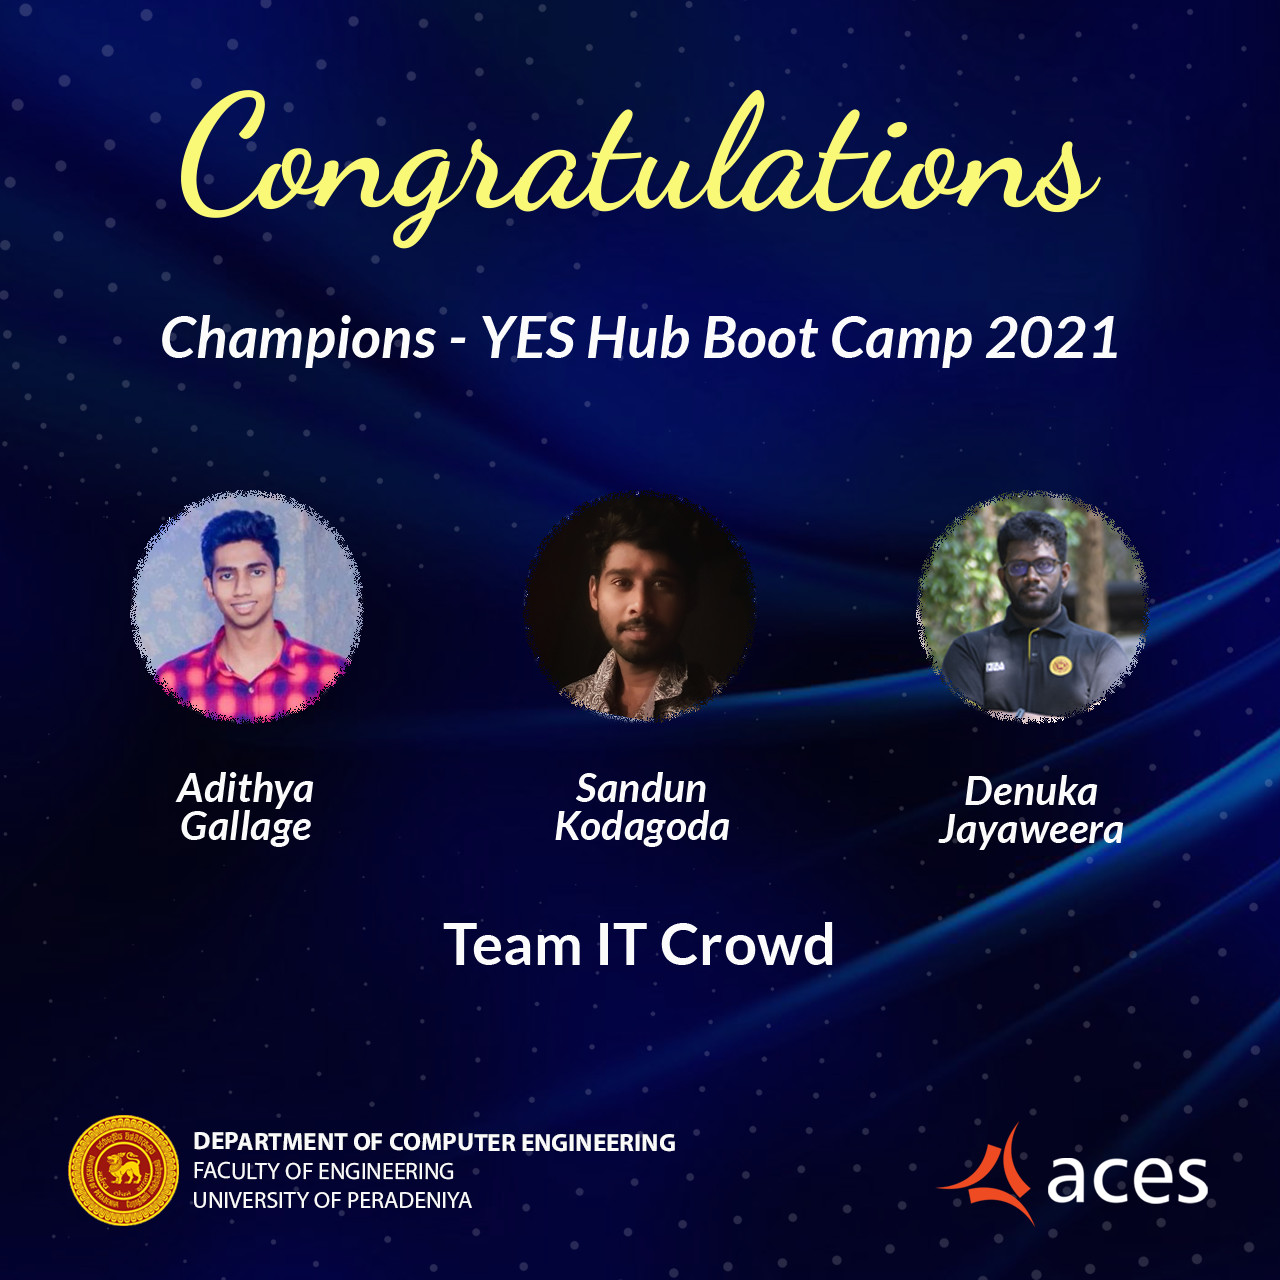 Team IT crowd wins the championship in Yes Hub Bootcamp’21